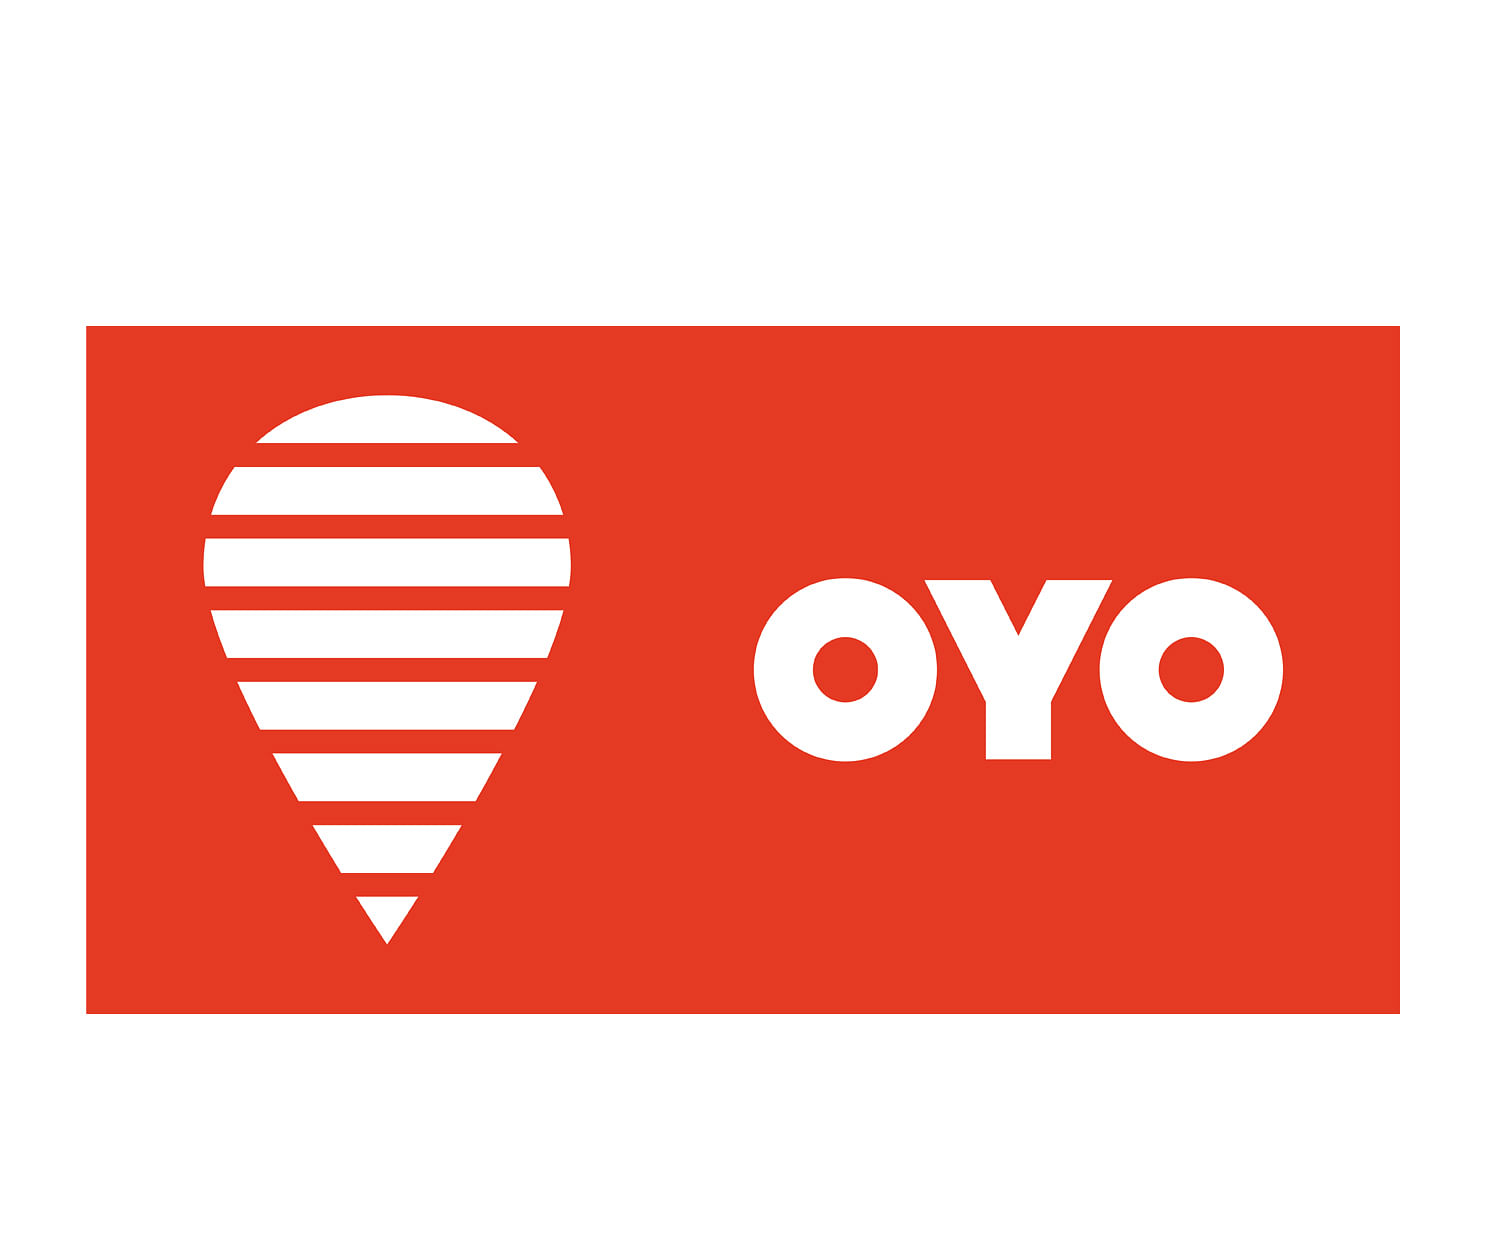 Oyo, founded by Agarwal in 2013, has in particular been hit by a volley of unfavorable headlines in recent months. (DH Photo)